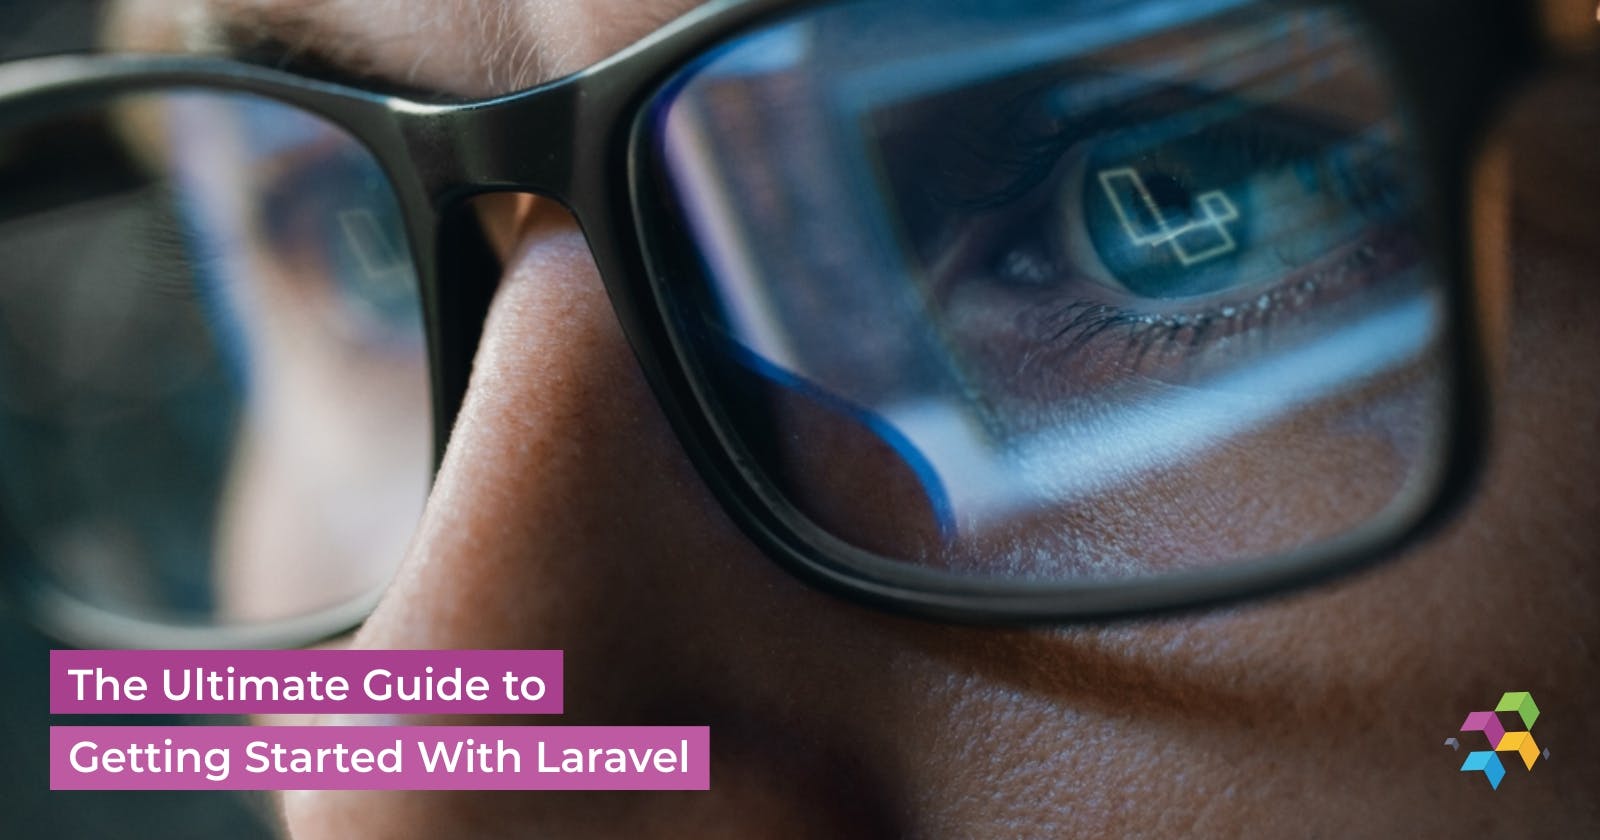 The Ultimate Guide to Getting Started With Laravel